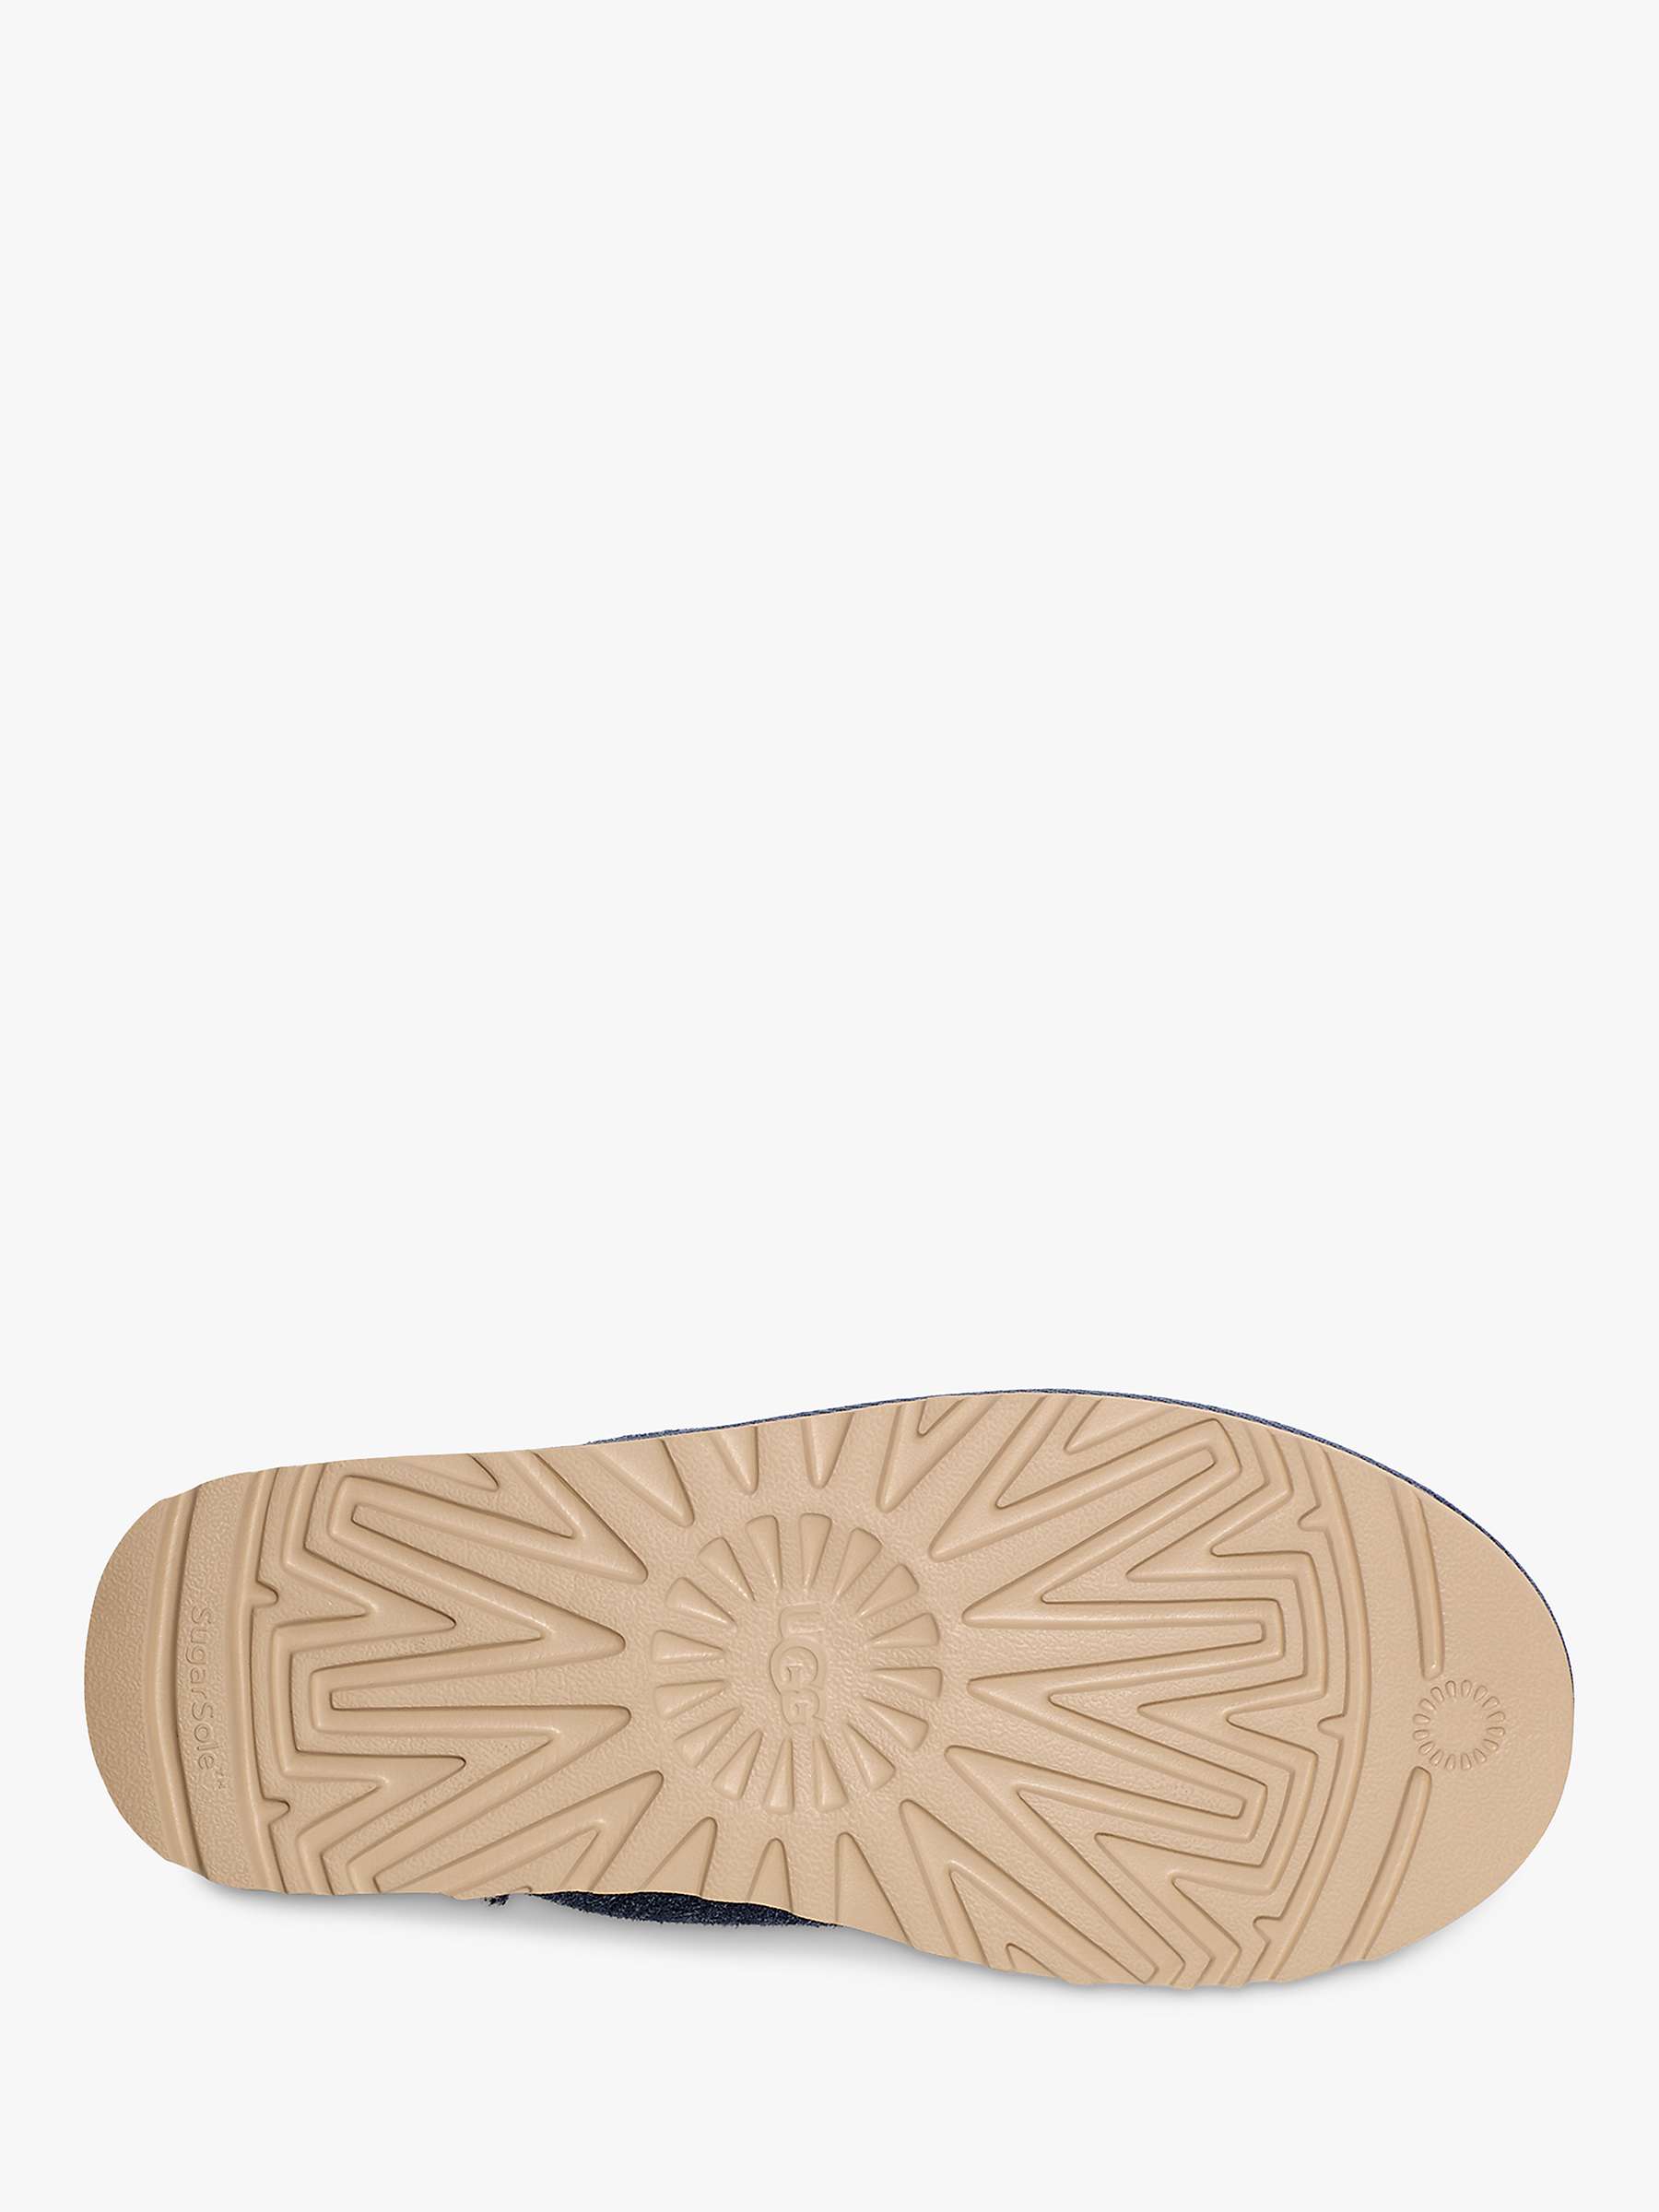 Buy UGG Classic Slip On Shaggy Slippers, Blue Online at johnlewis.com